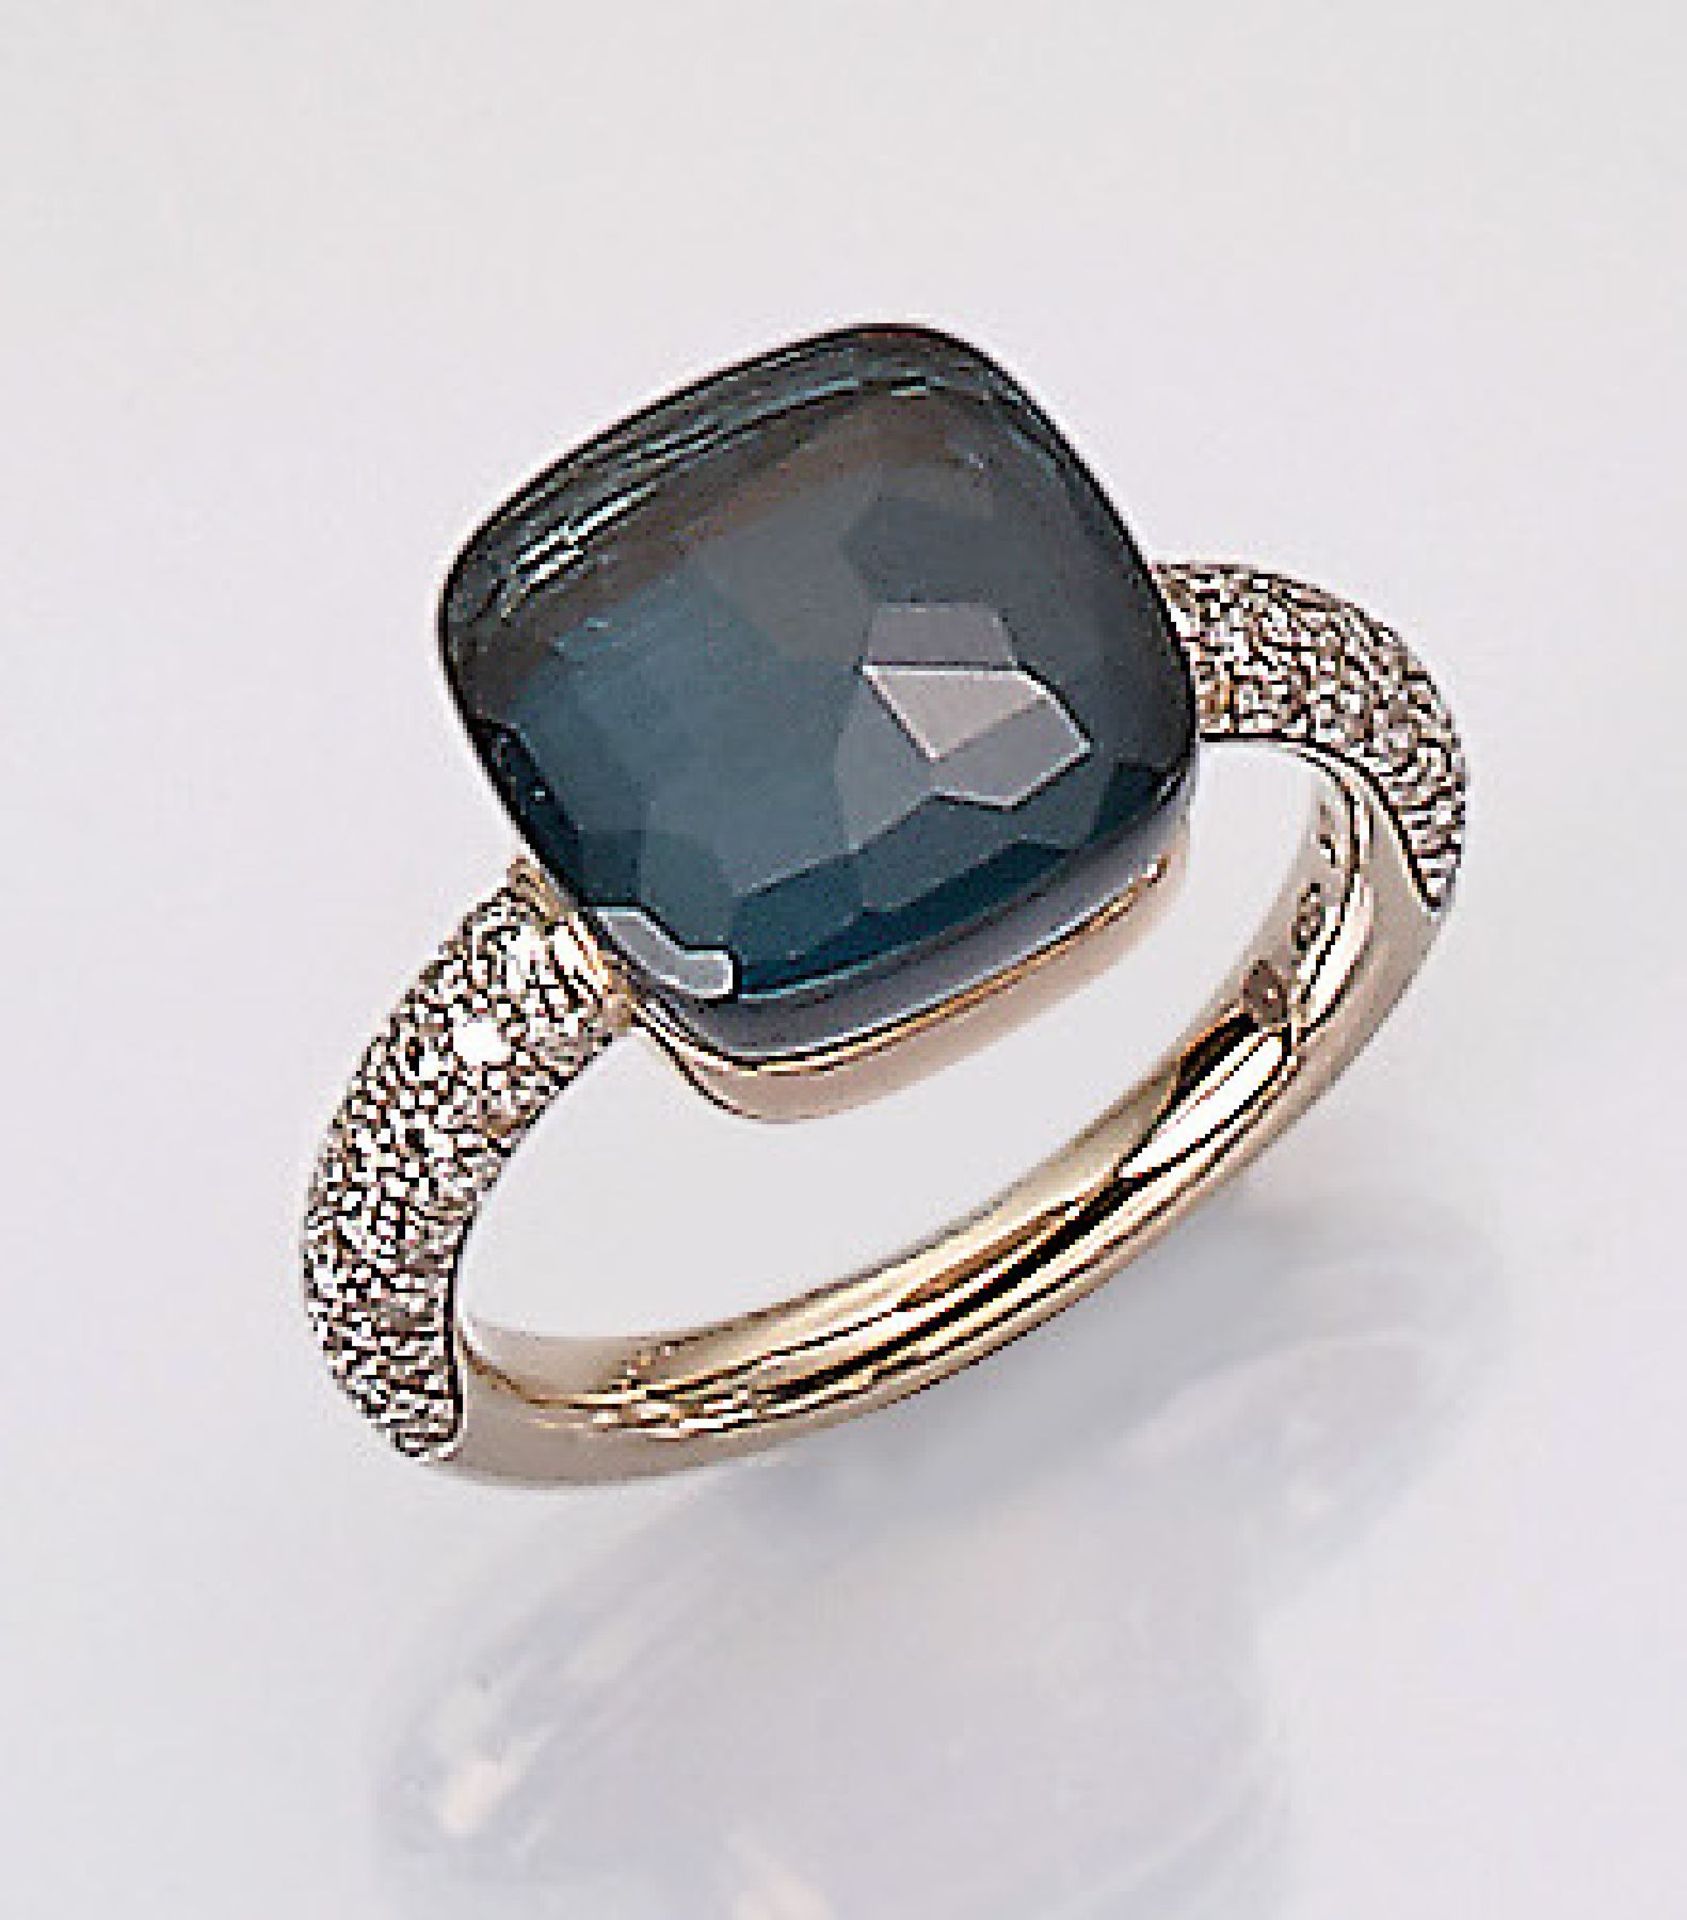 18 kt gold POMELLATO ring "Nudo" with brilliants and topaz (treated) , YG 750/000,with blue topaz in